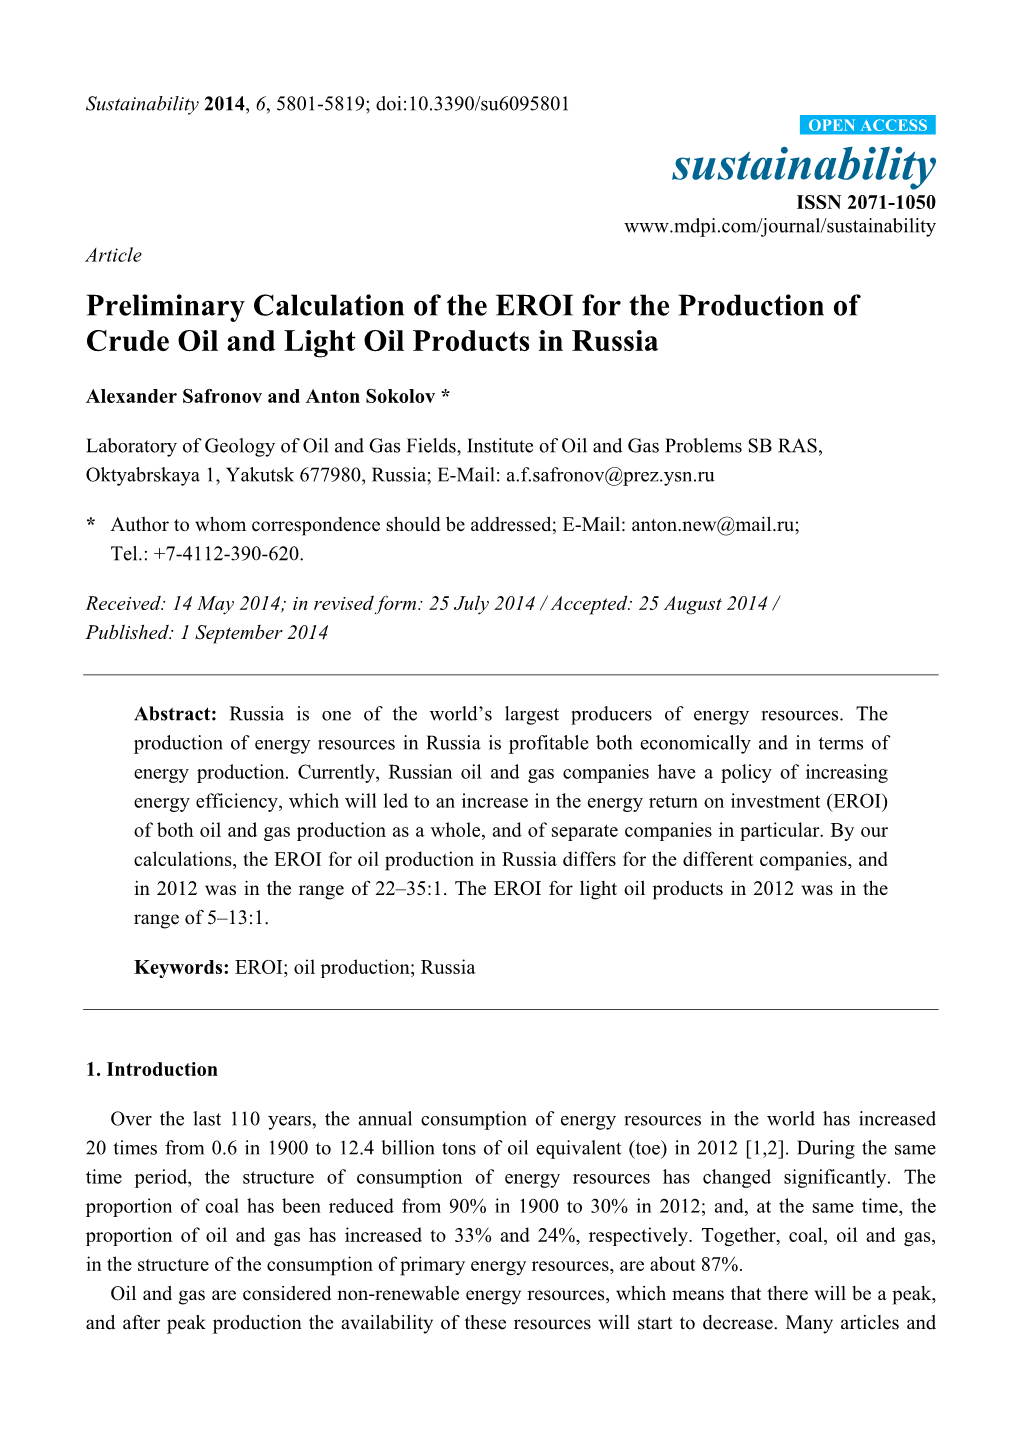 Preliminary Calculation of the EROI for the Production of Crude Oil and Light Oil Products in Russia